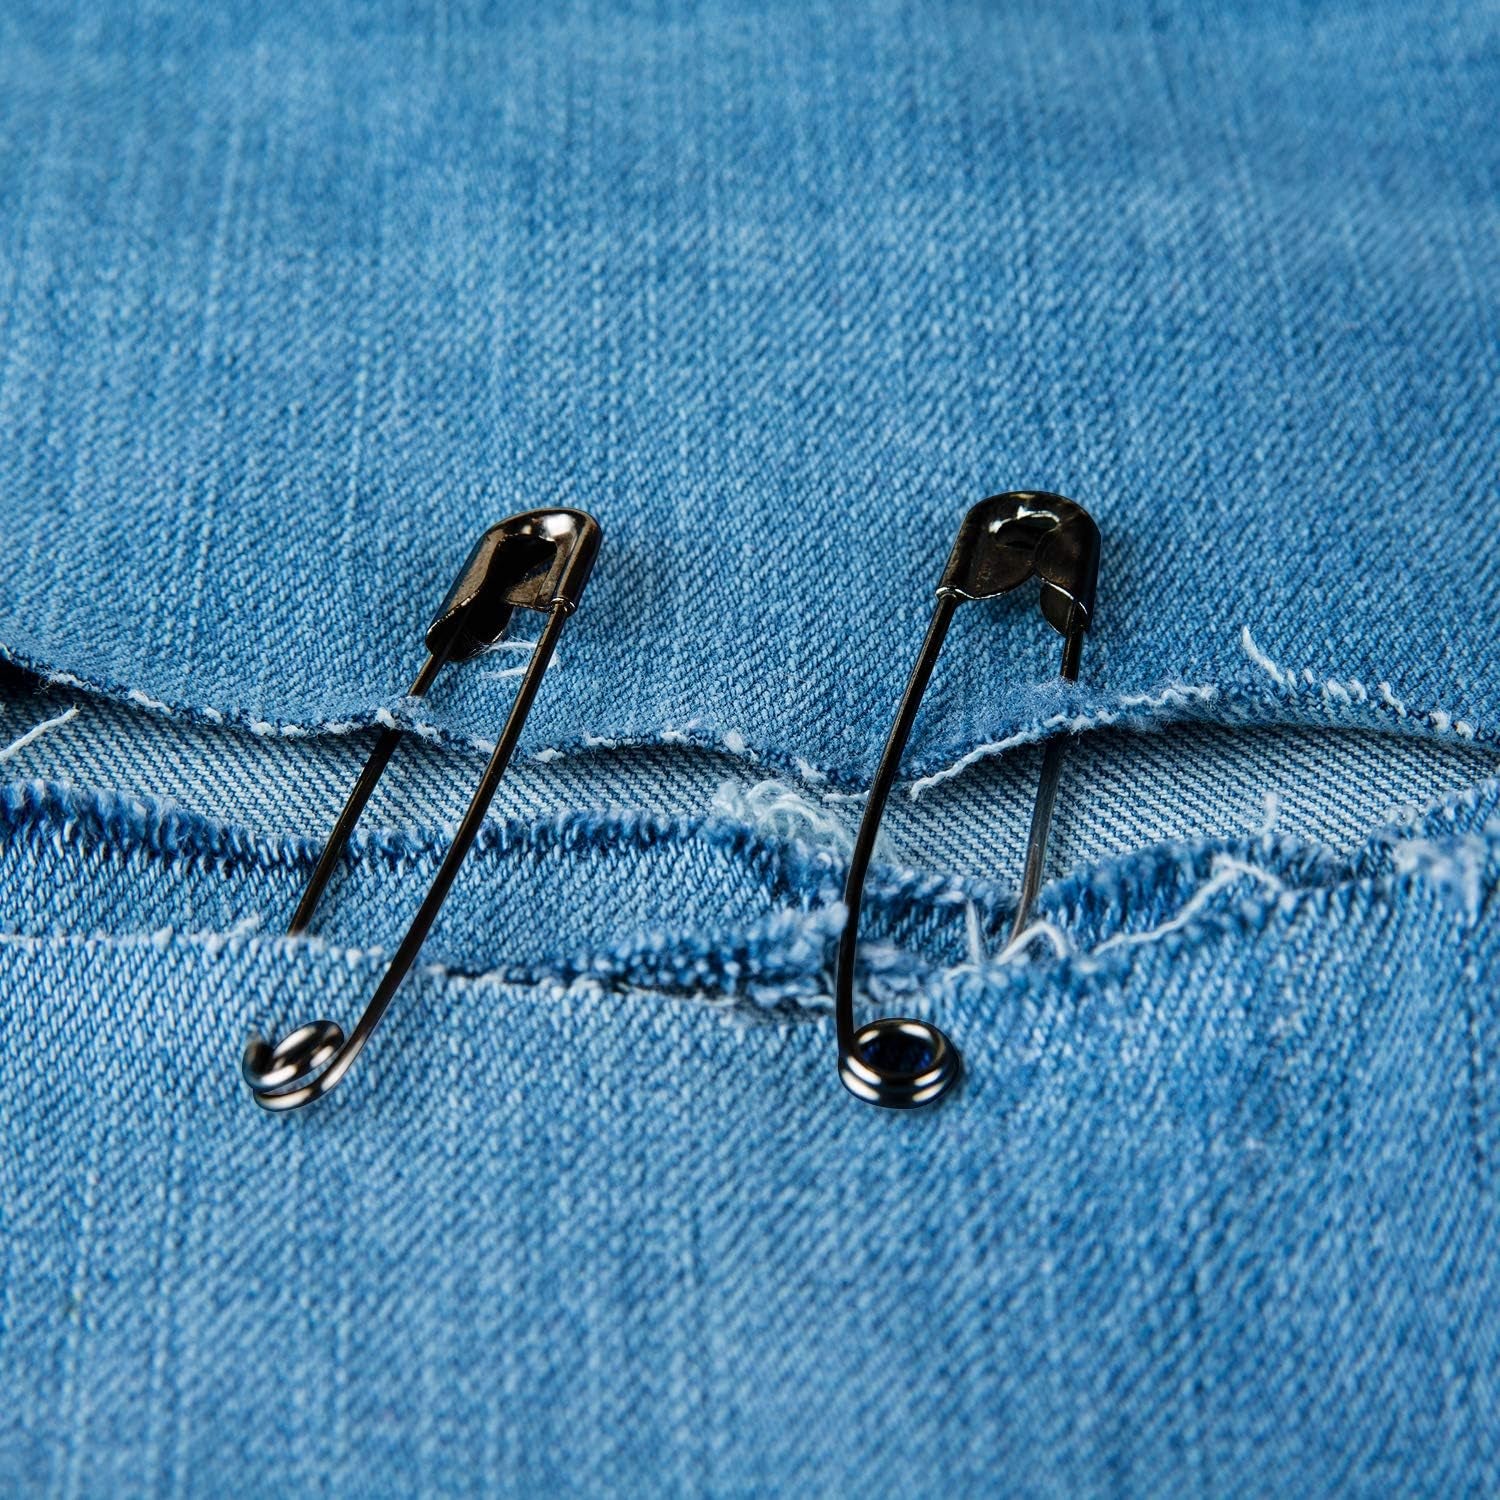 5 Sizes Black Safety Pins Assorted 25-55Mm 